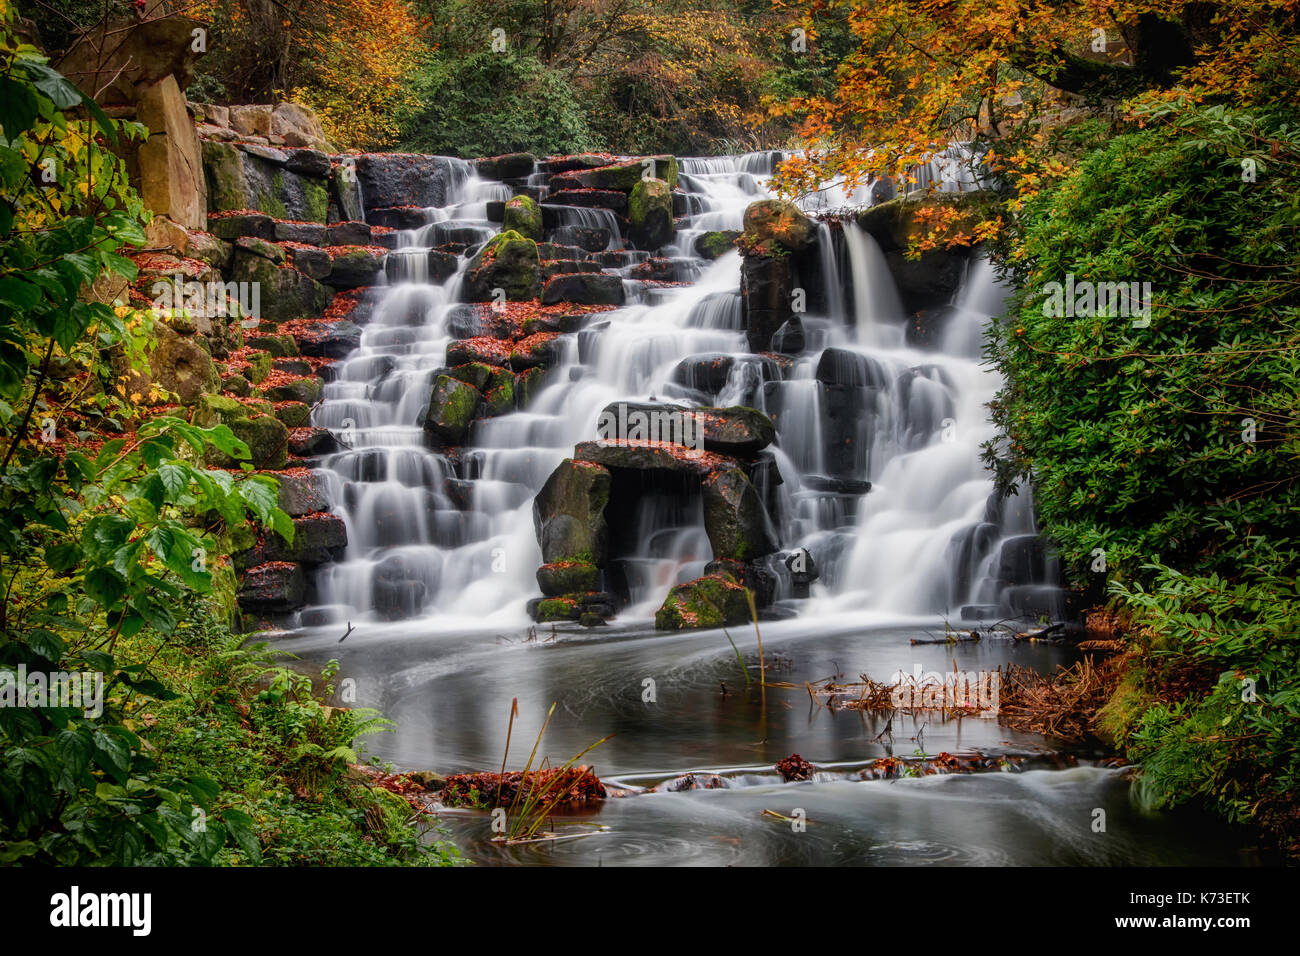 The Cascades Waterfall in Autumn. Virginia Water, Surrey. UK.  A long exposure gives the milky white motion blur of water rushing over the rocks Stock Photo